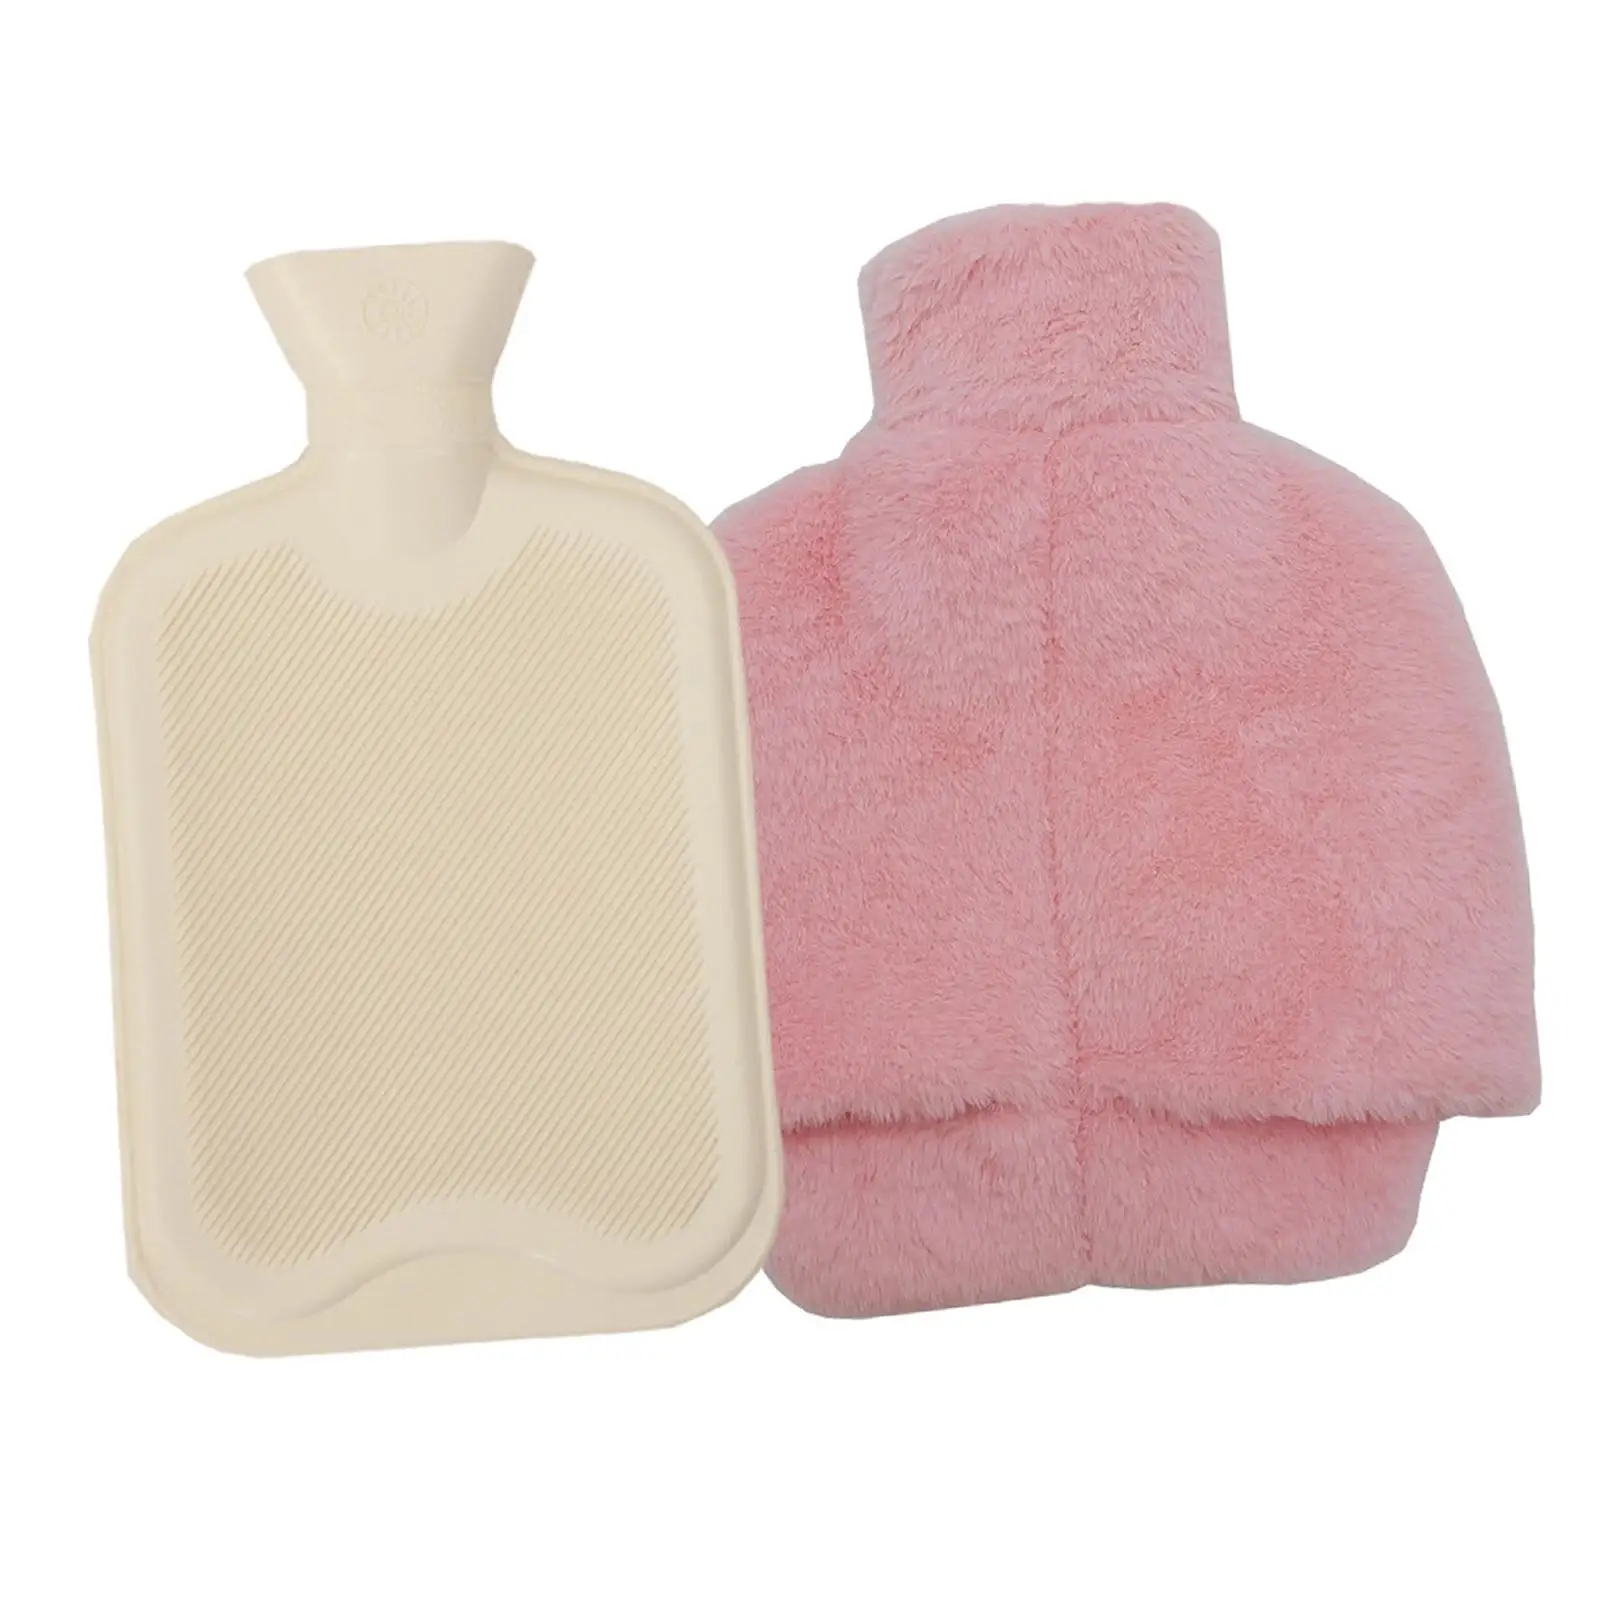 Hot Water Bag Leakproof with Removable Cover Hand Feet Warmer Hot and Cold Compress Comfortable Hot Water Bottle for Shoulder